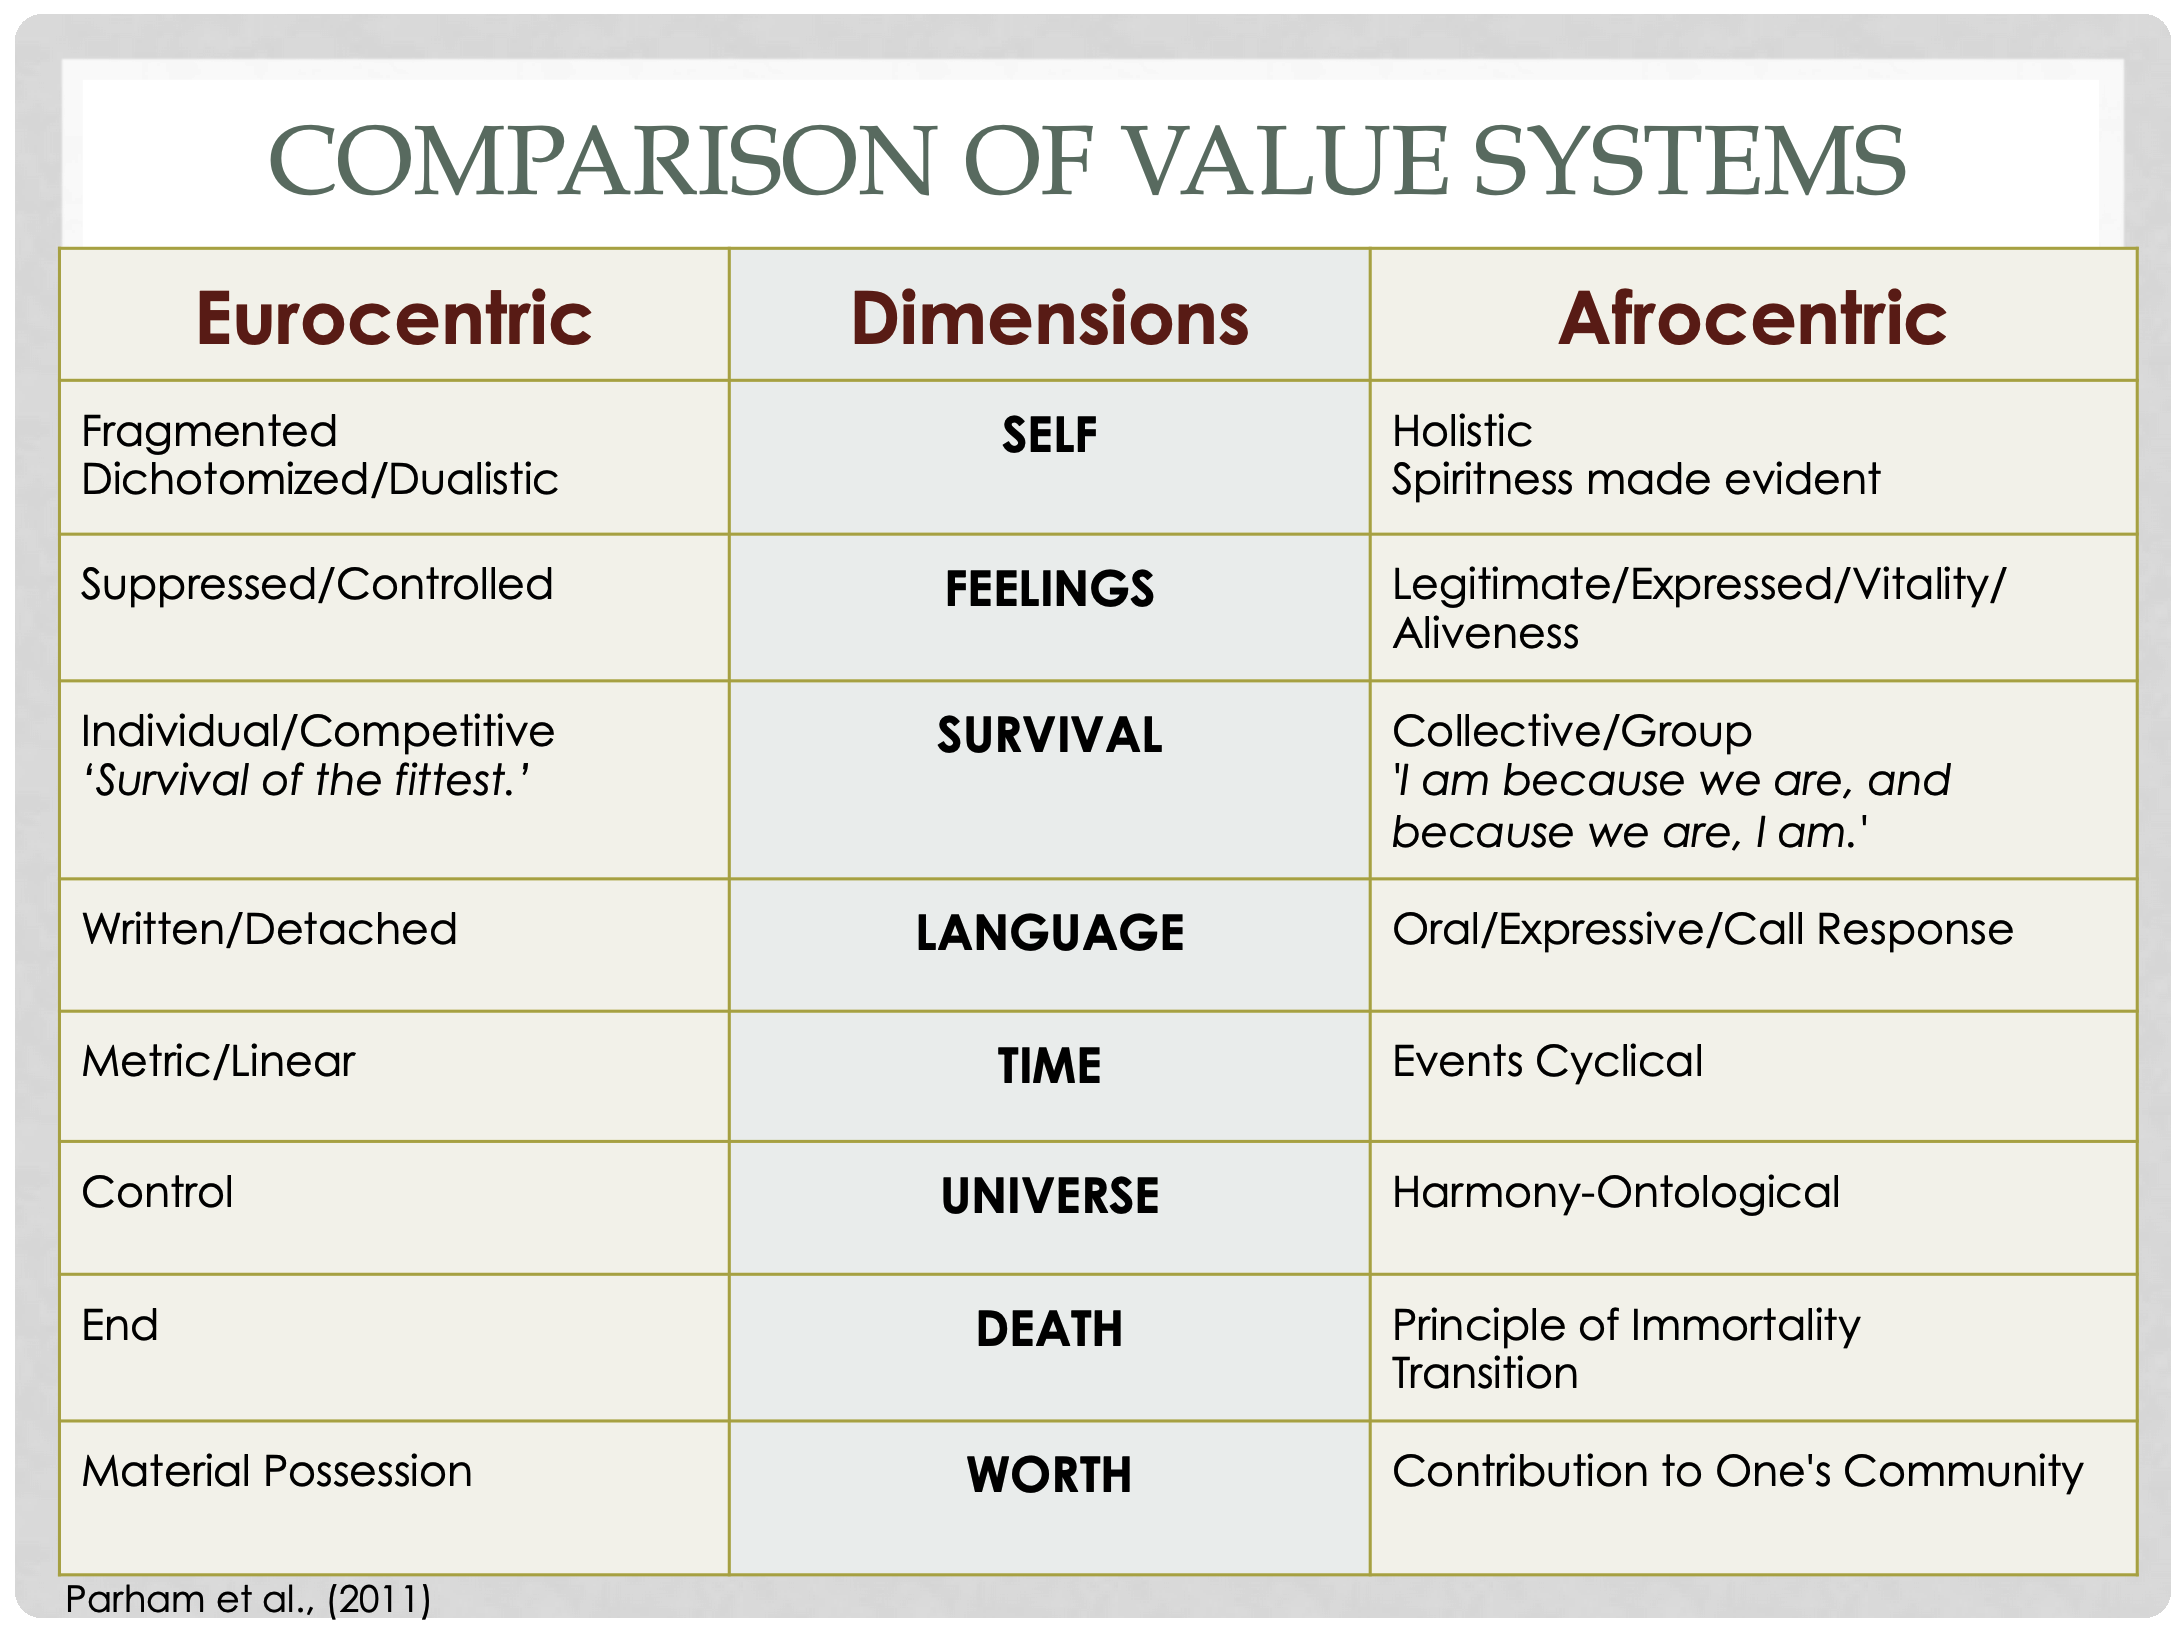 Afrocentric Values